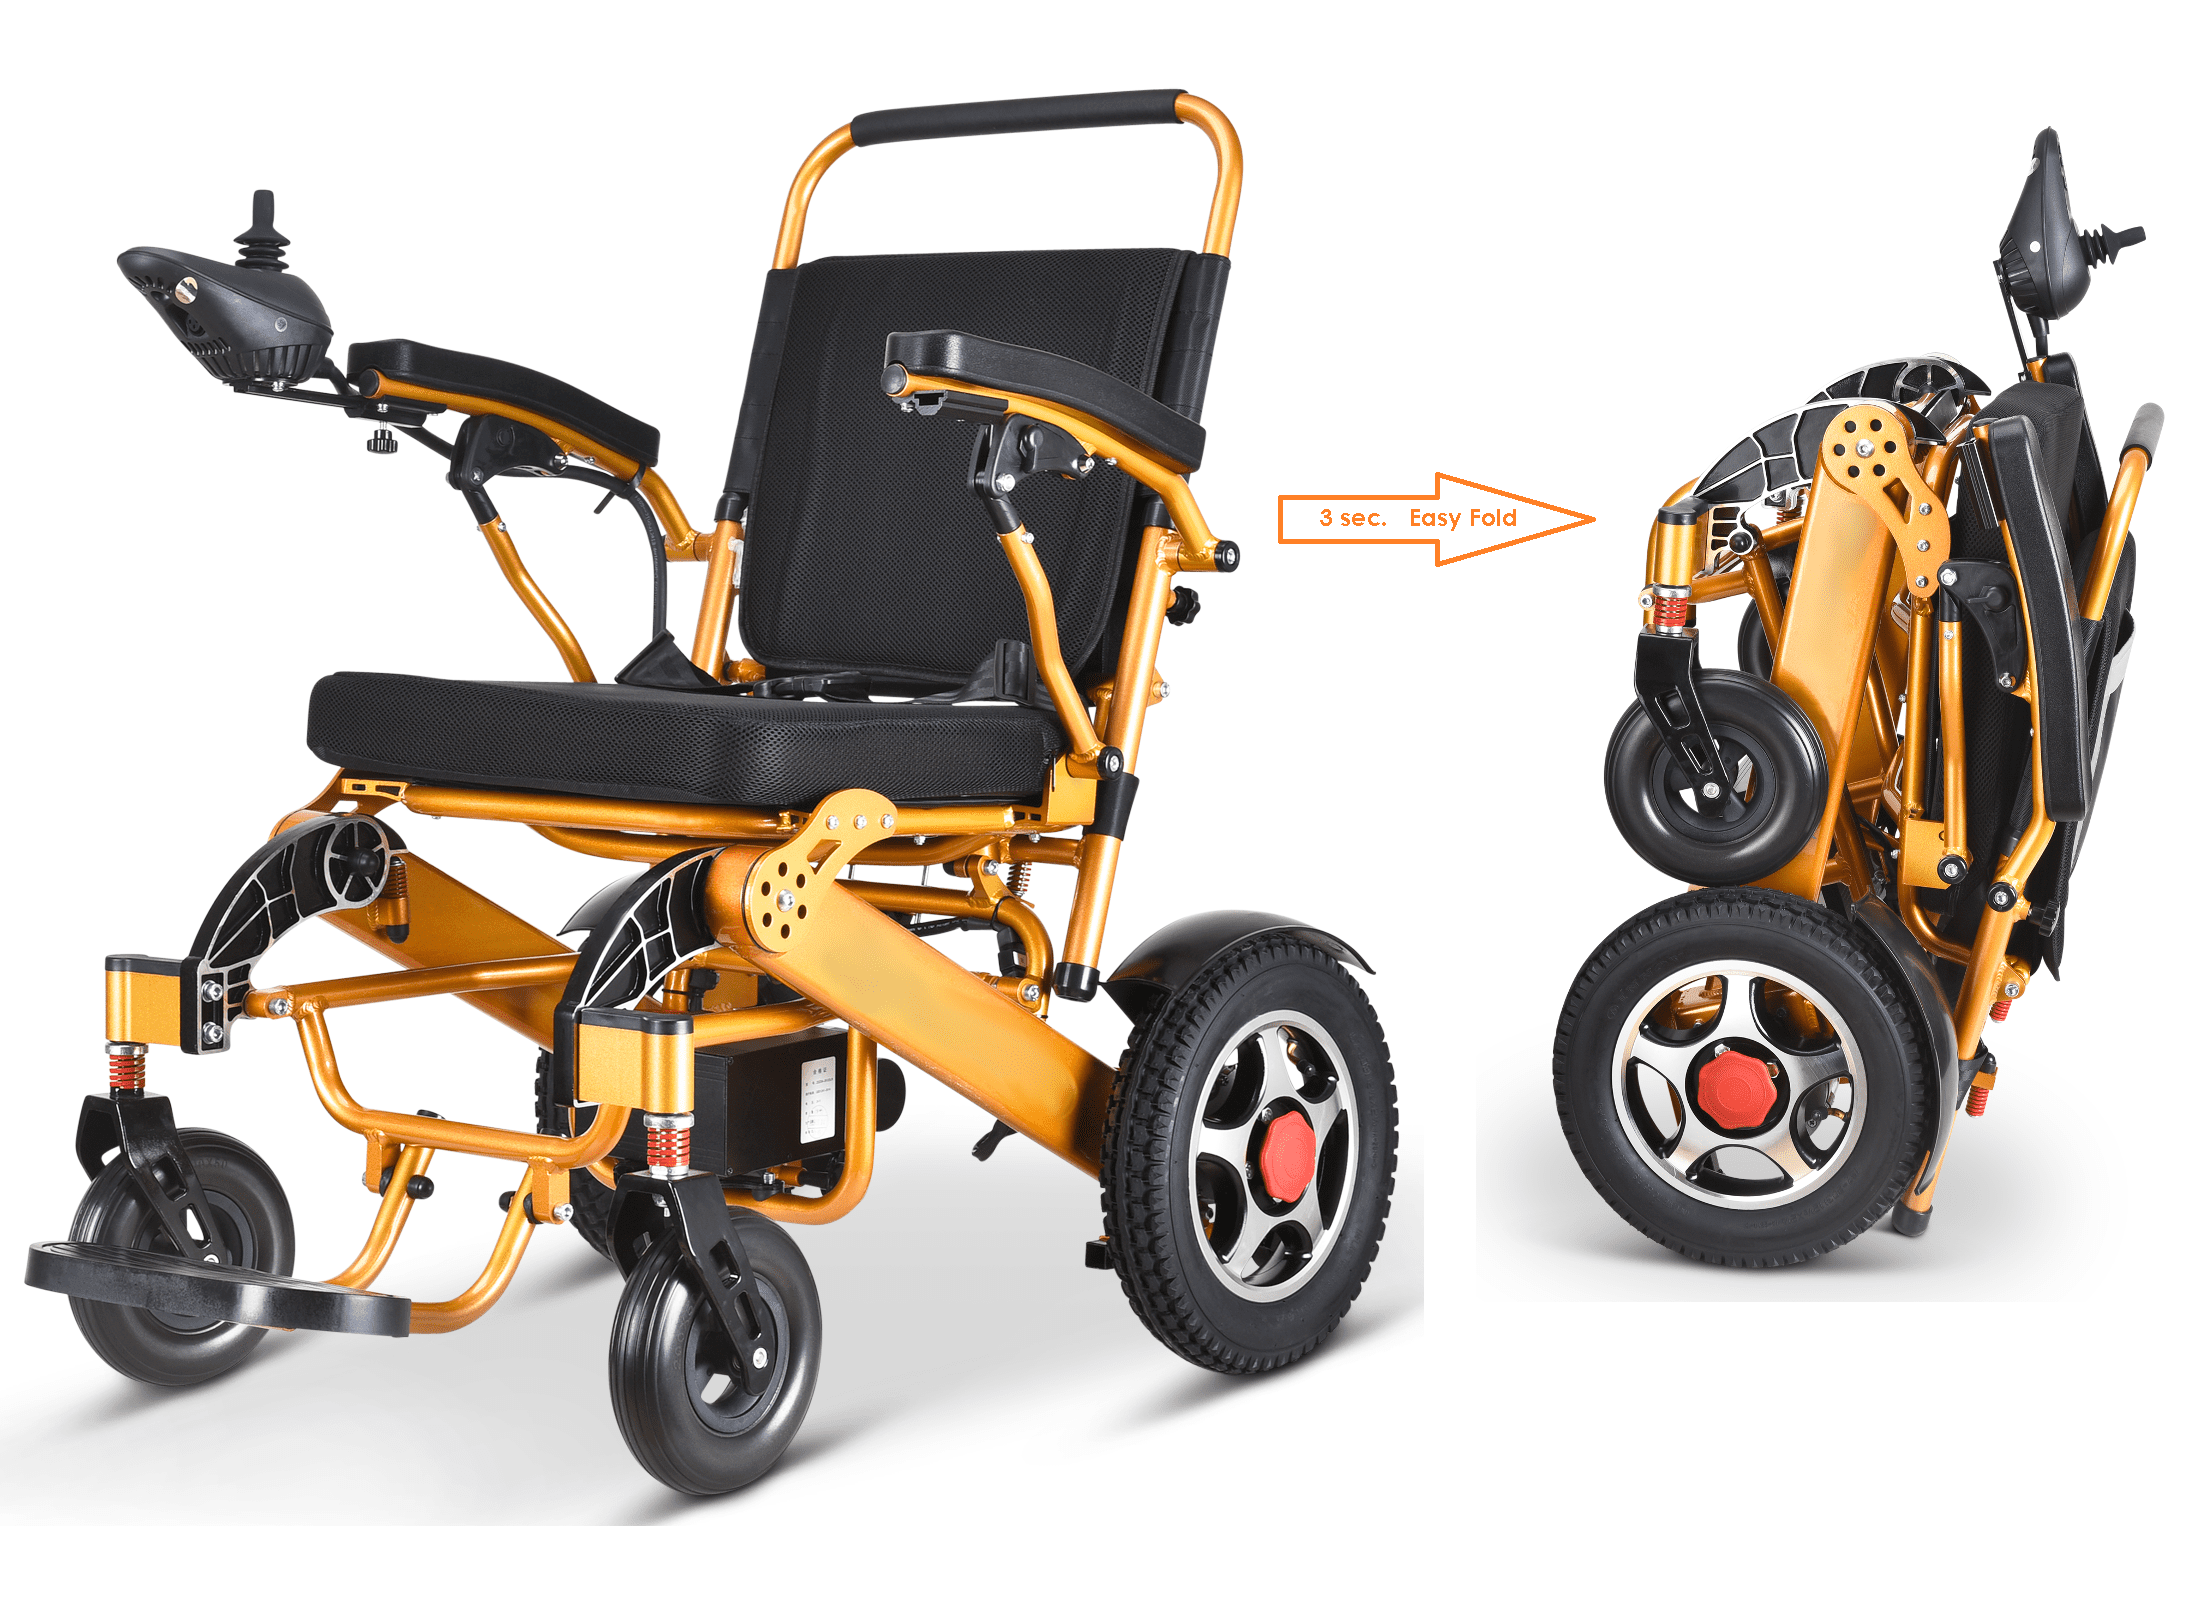 Fold and Travel Lightweight Portable Electric Wheelchair Mobility